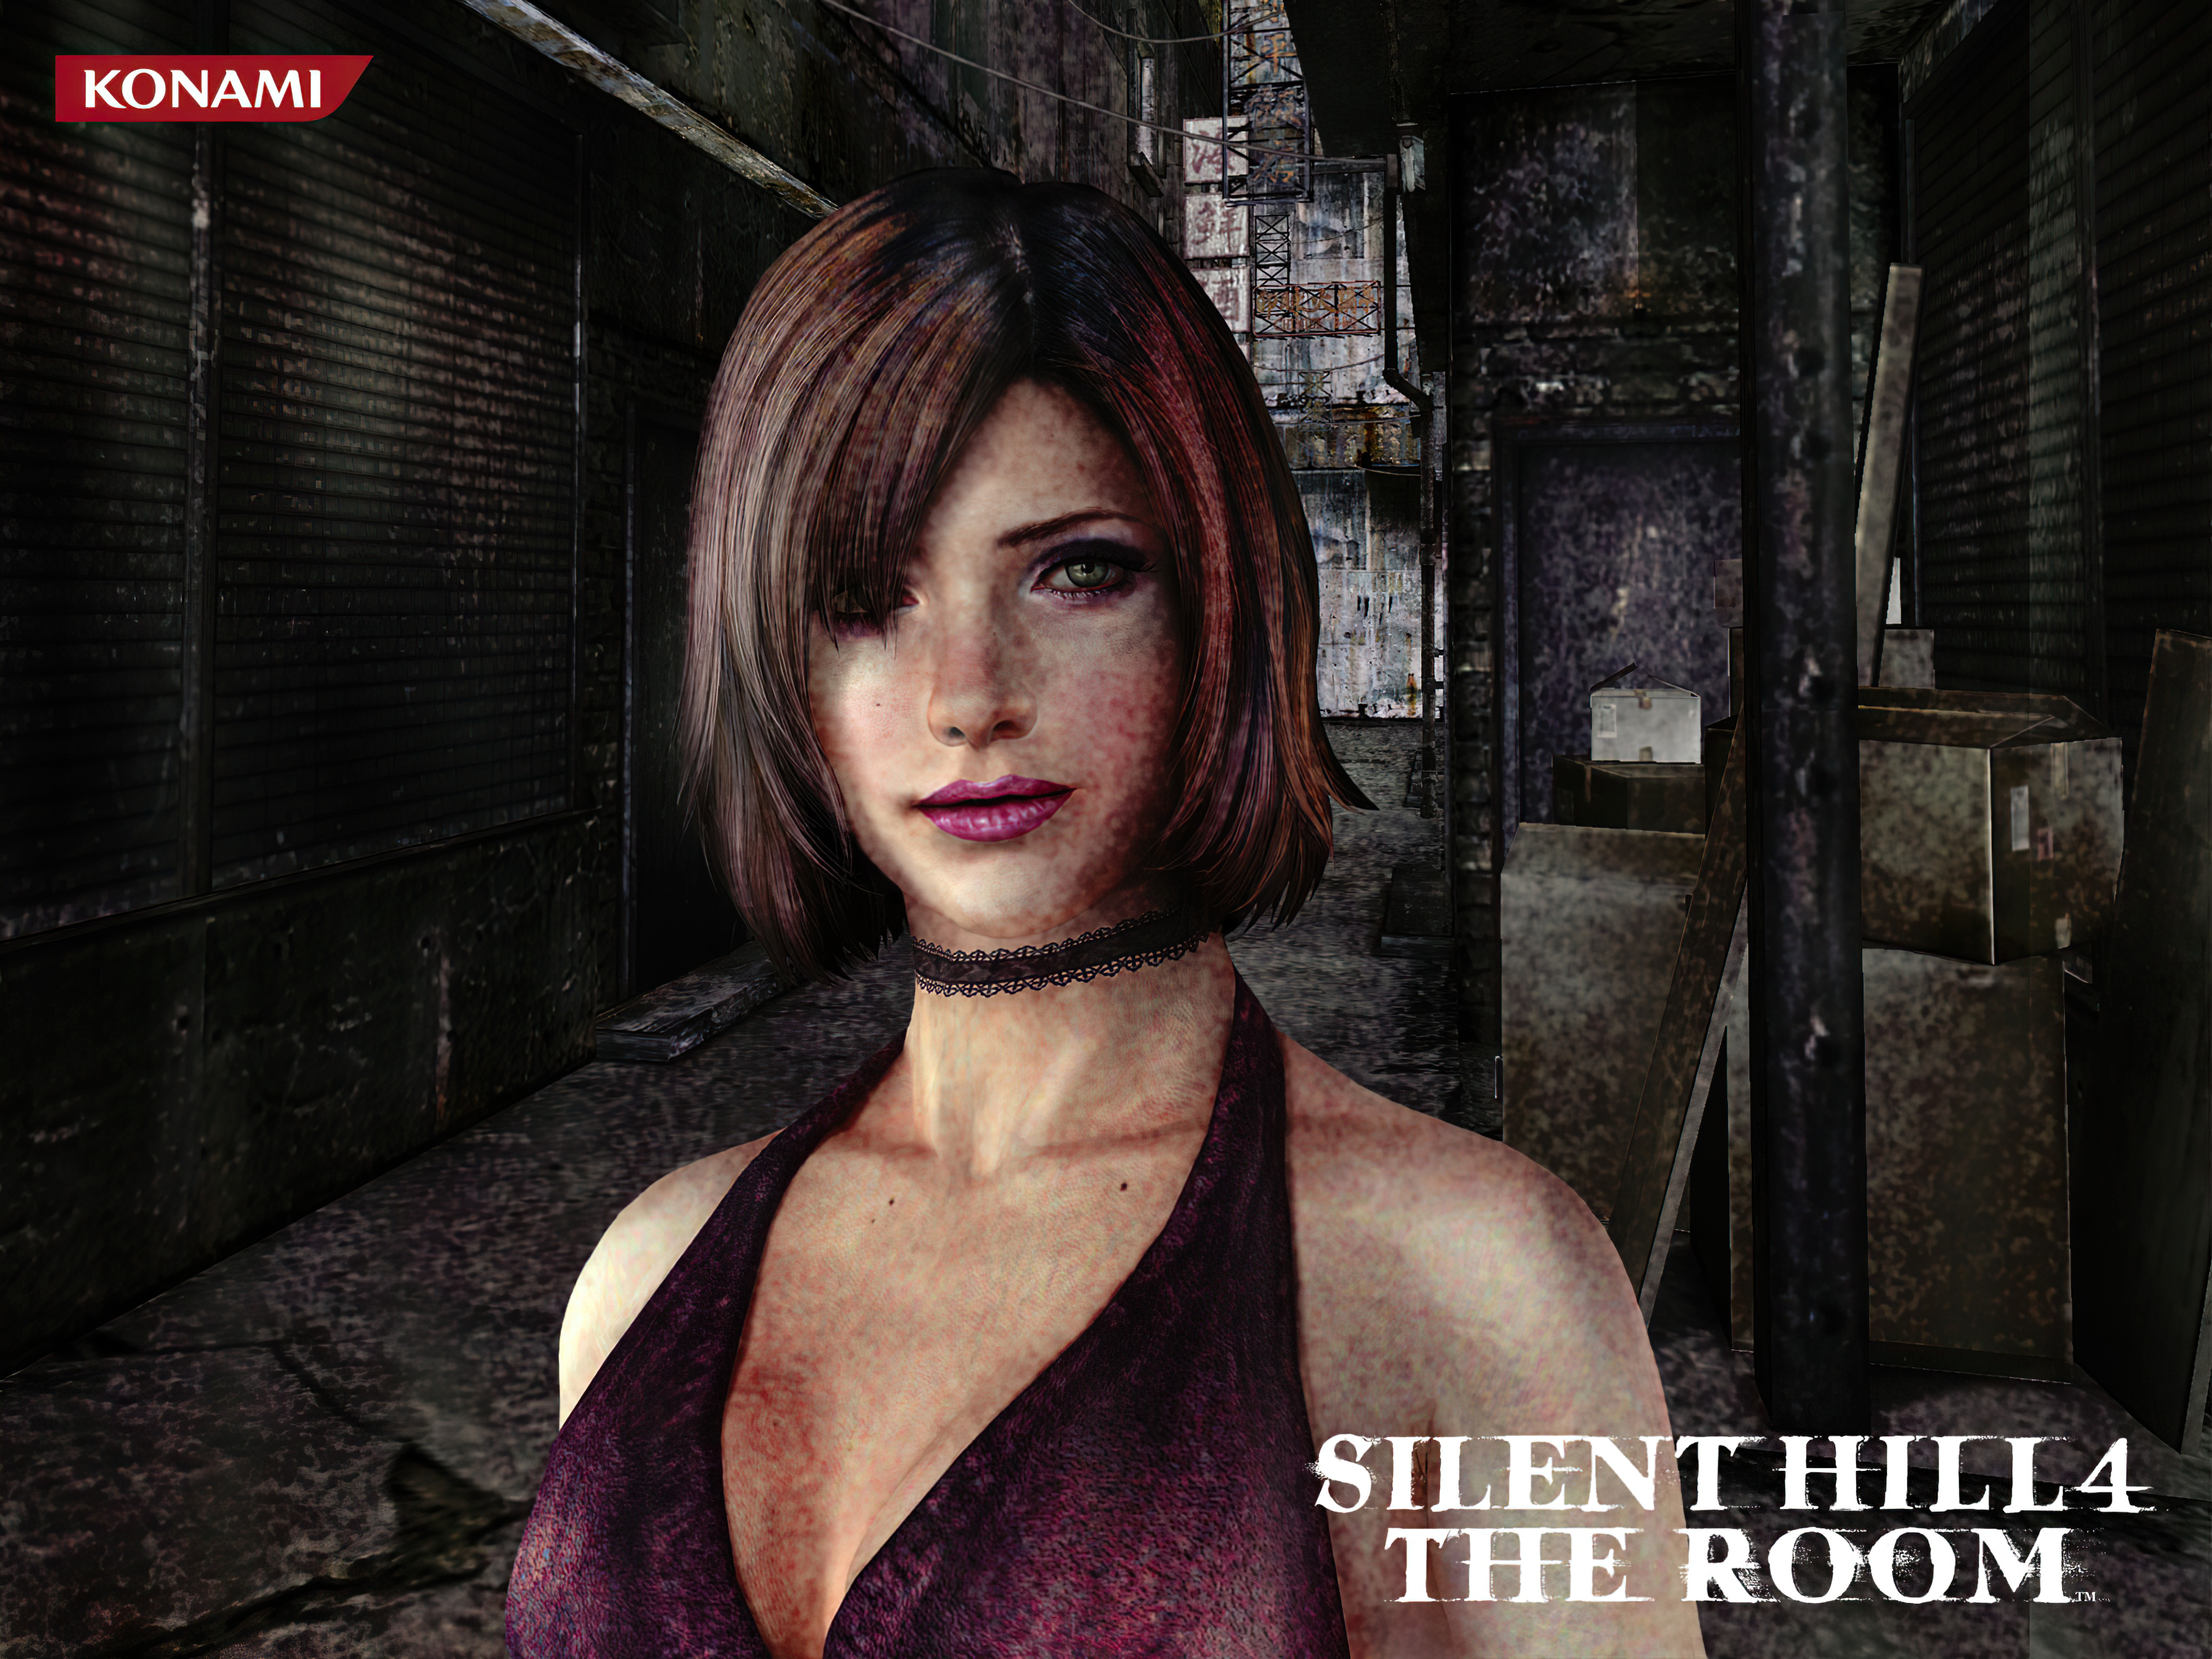 Eileen Galvin in Silent Hill video game. The iconic character stands in a haunting atmosphere.